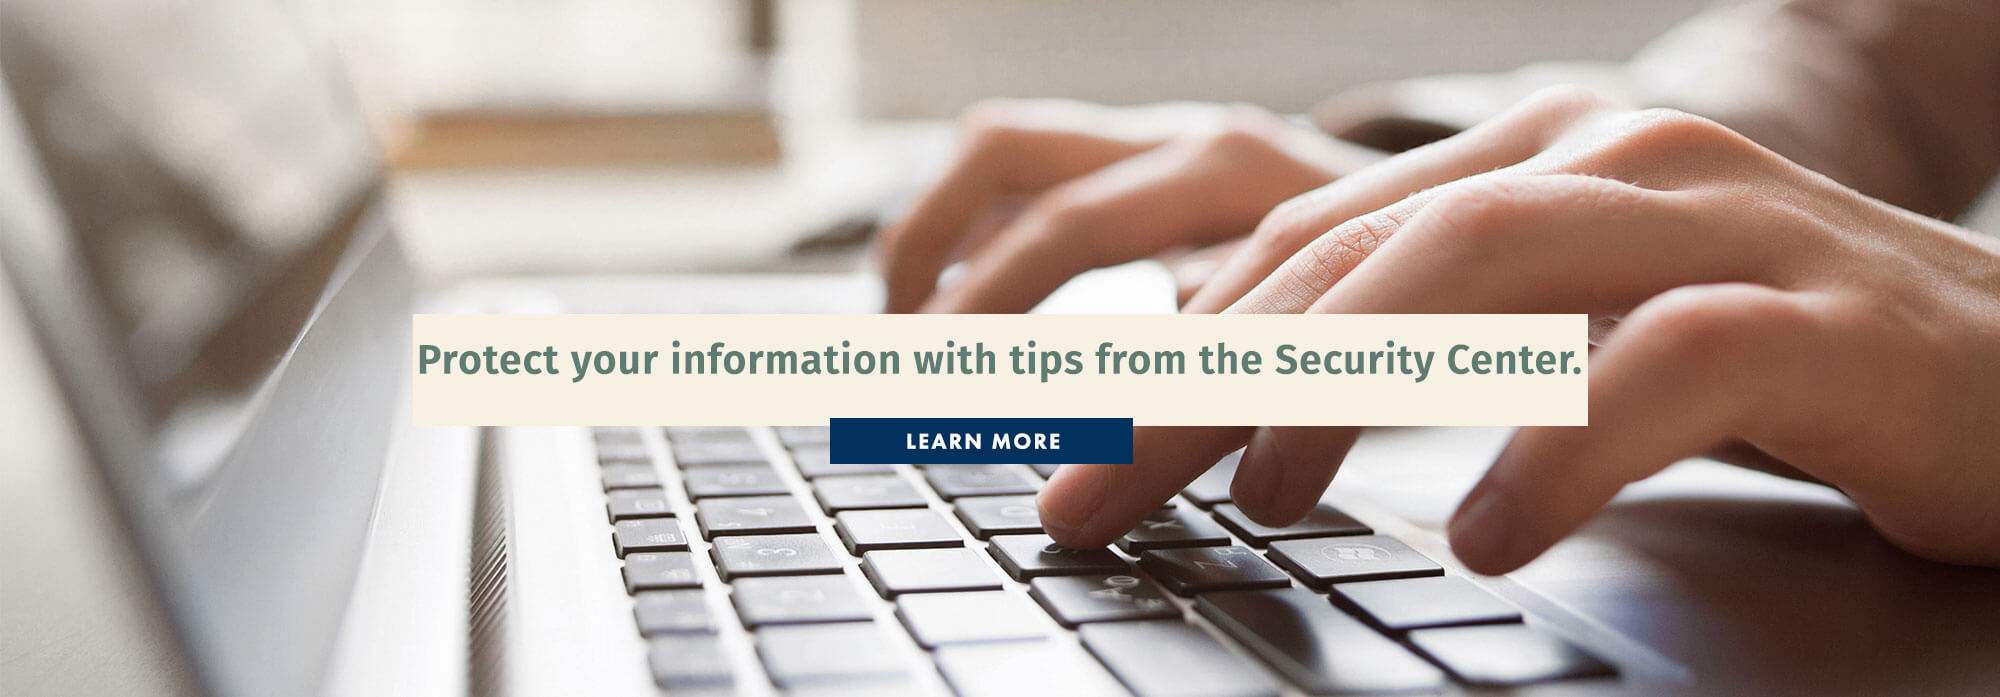 Protect your information with tips from the Security Center